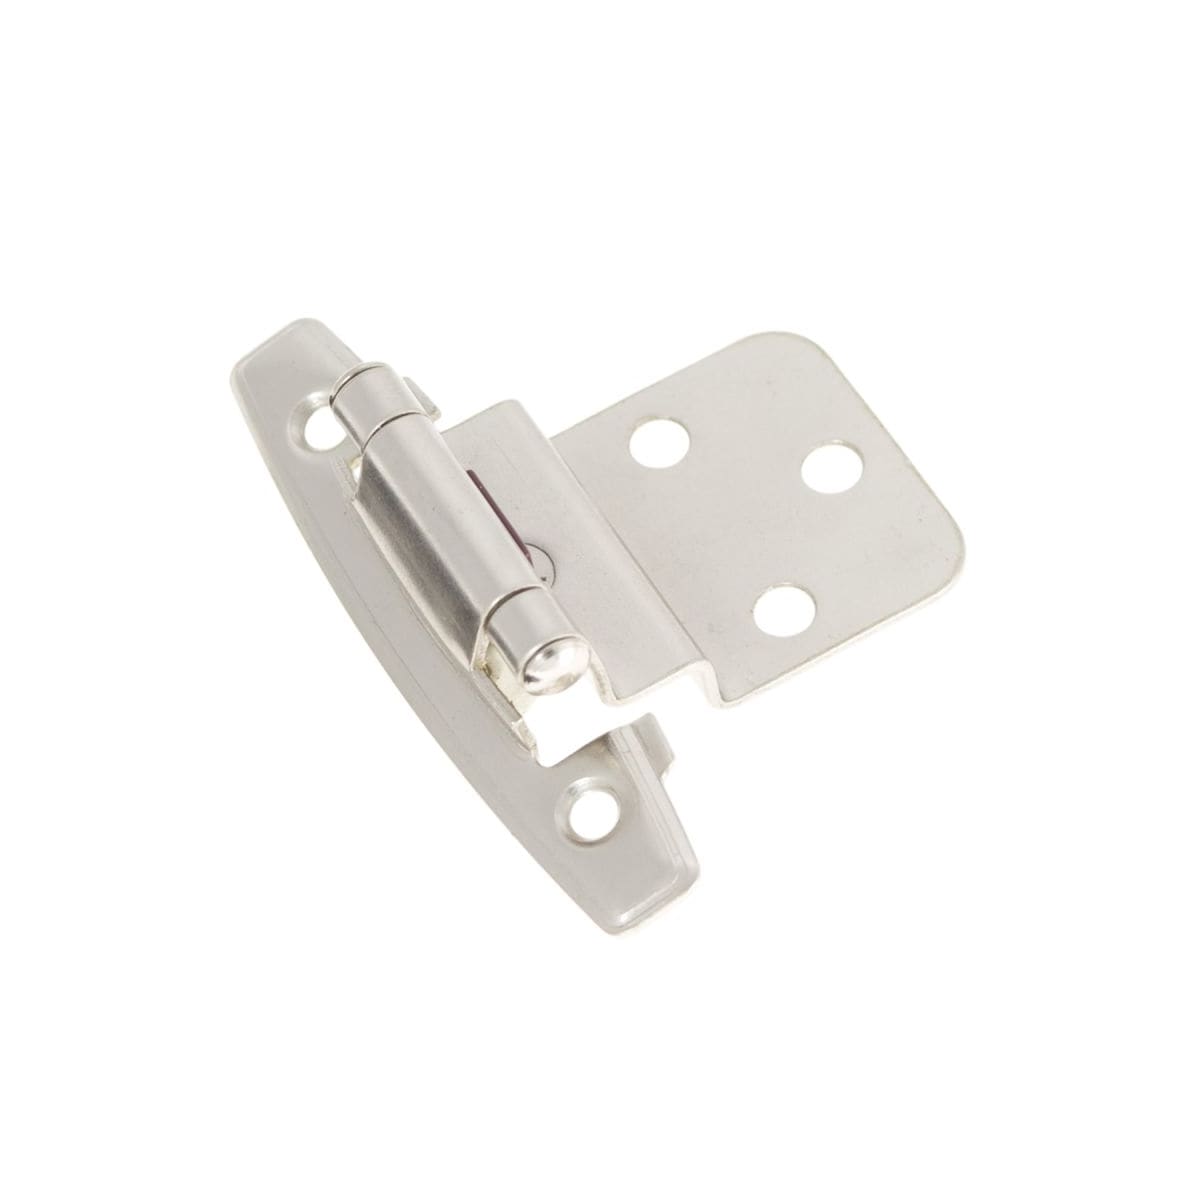 Hickory Hardware P295 Sn Satin Nickel Partial Inset Traditional